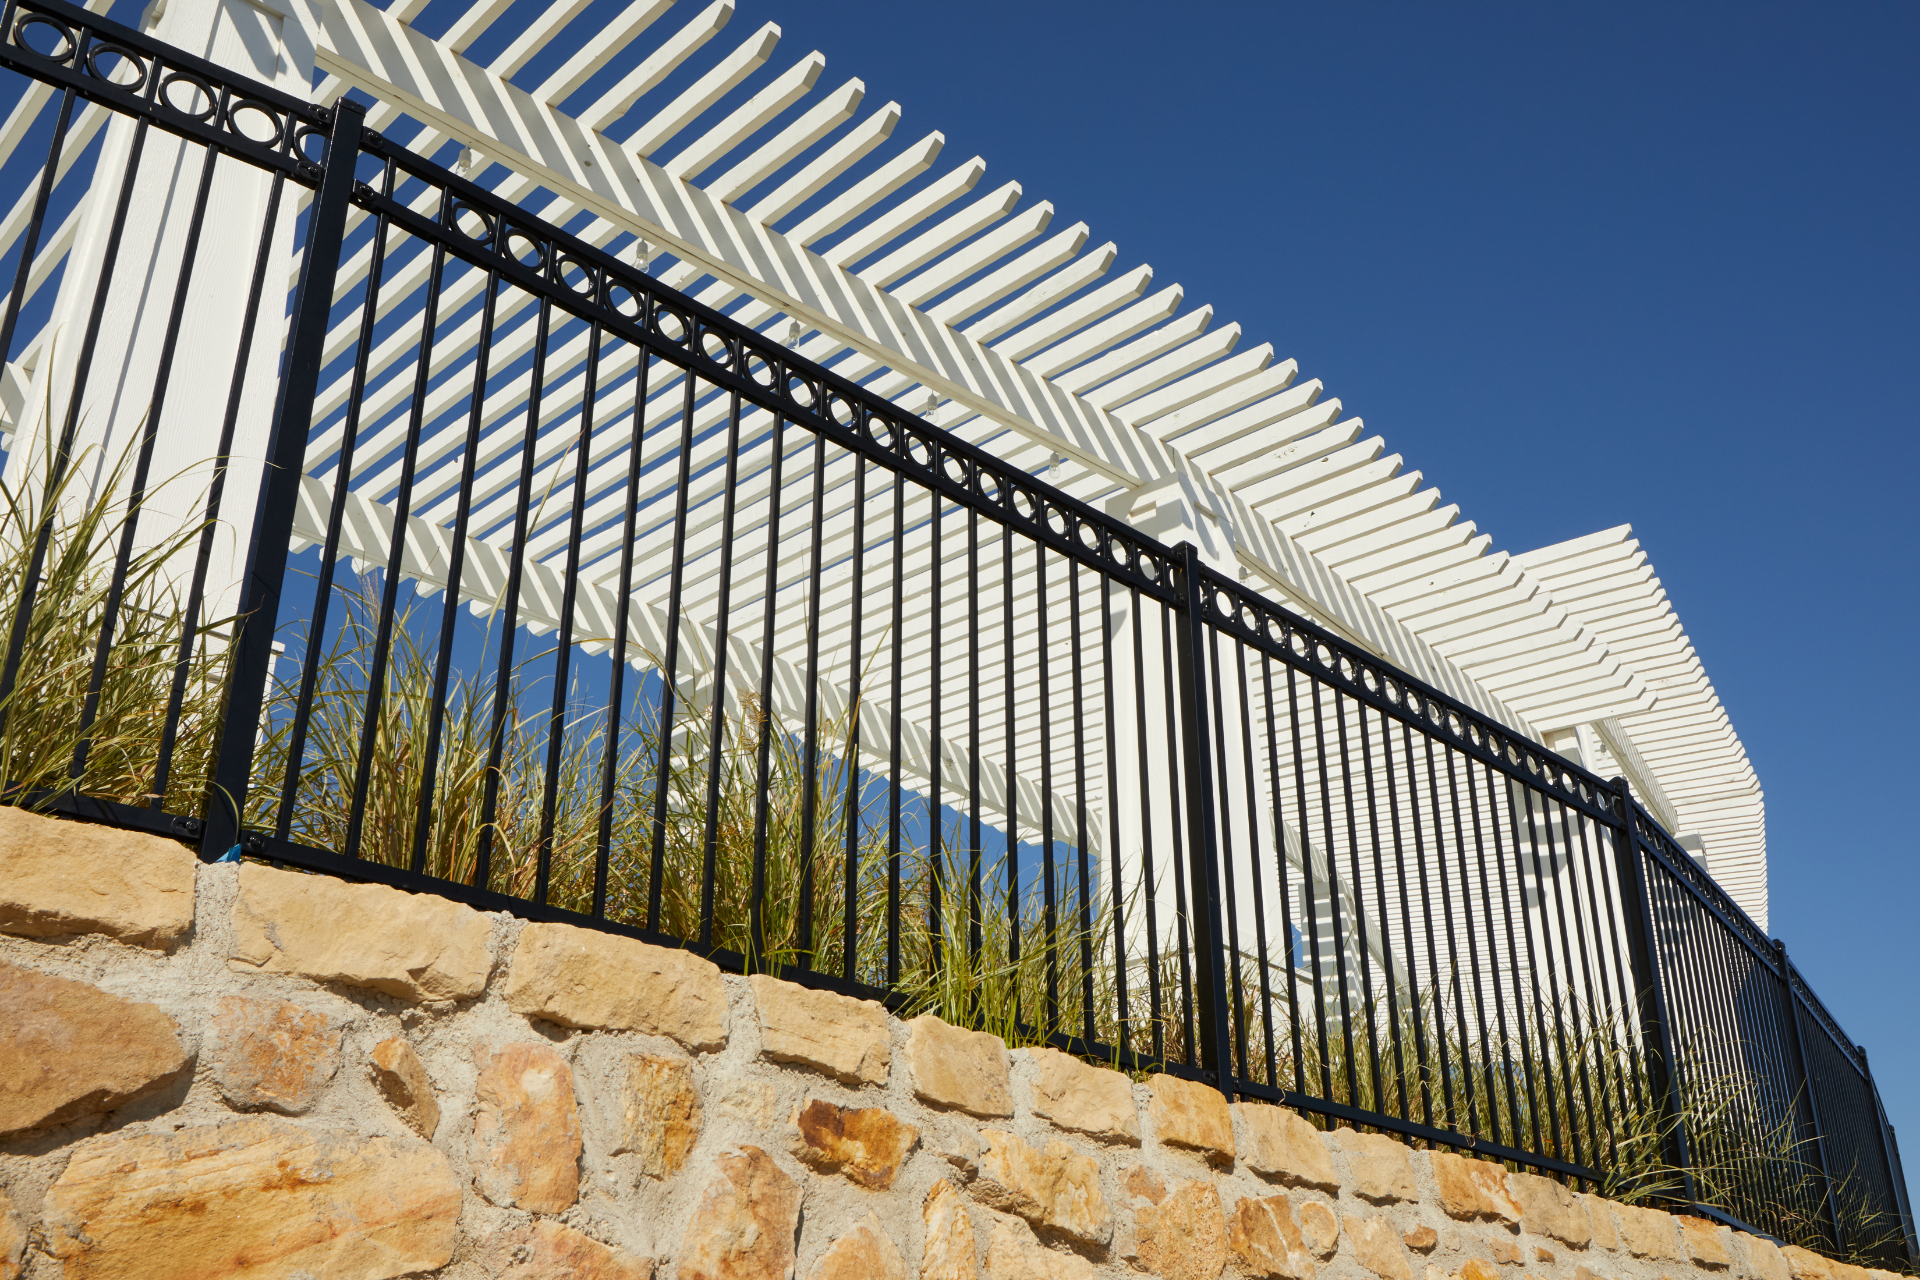 Steel fence with ornamental design on a stone wall, under a white pergola.